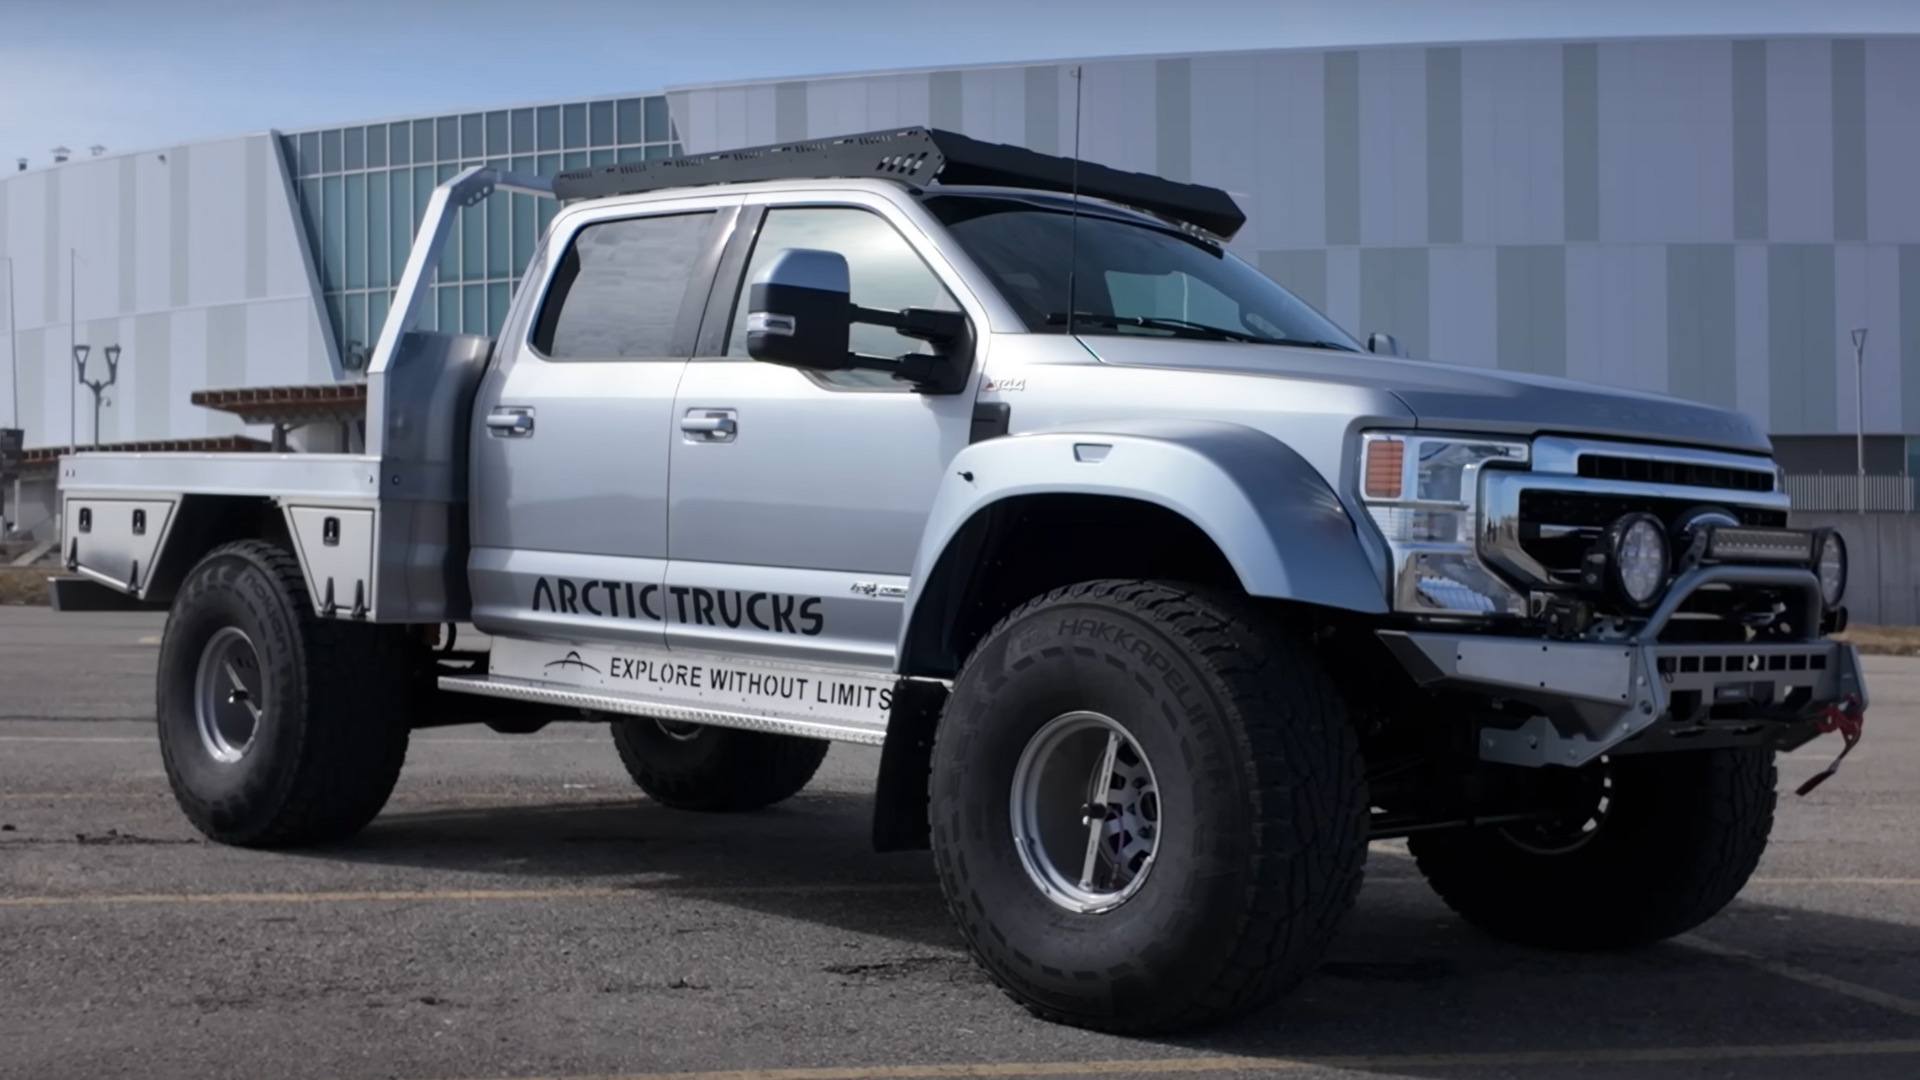 Massive Ford Super Duty designed for Arctic dwarf Raptors and everything in the middle